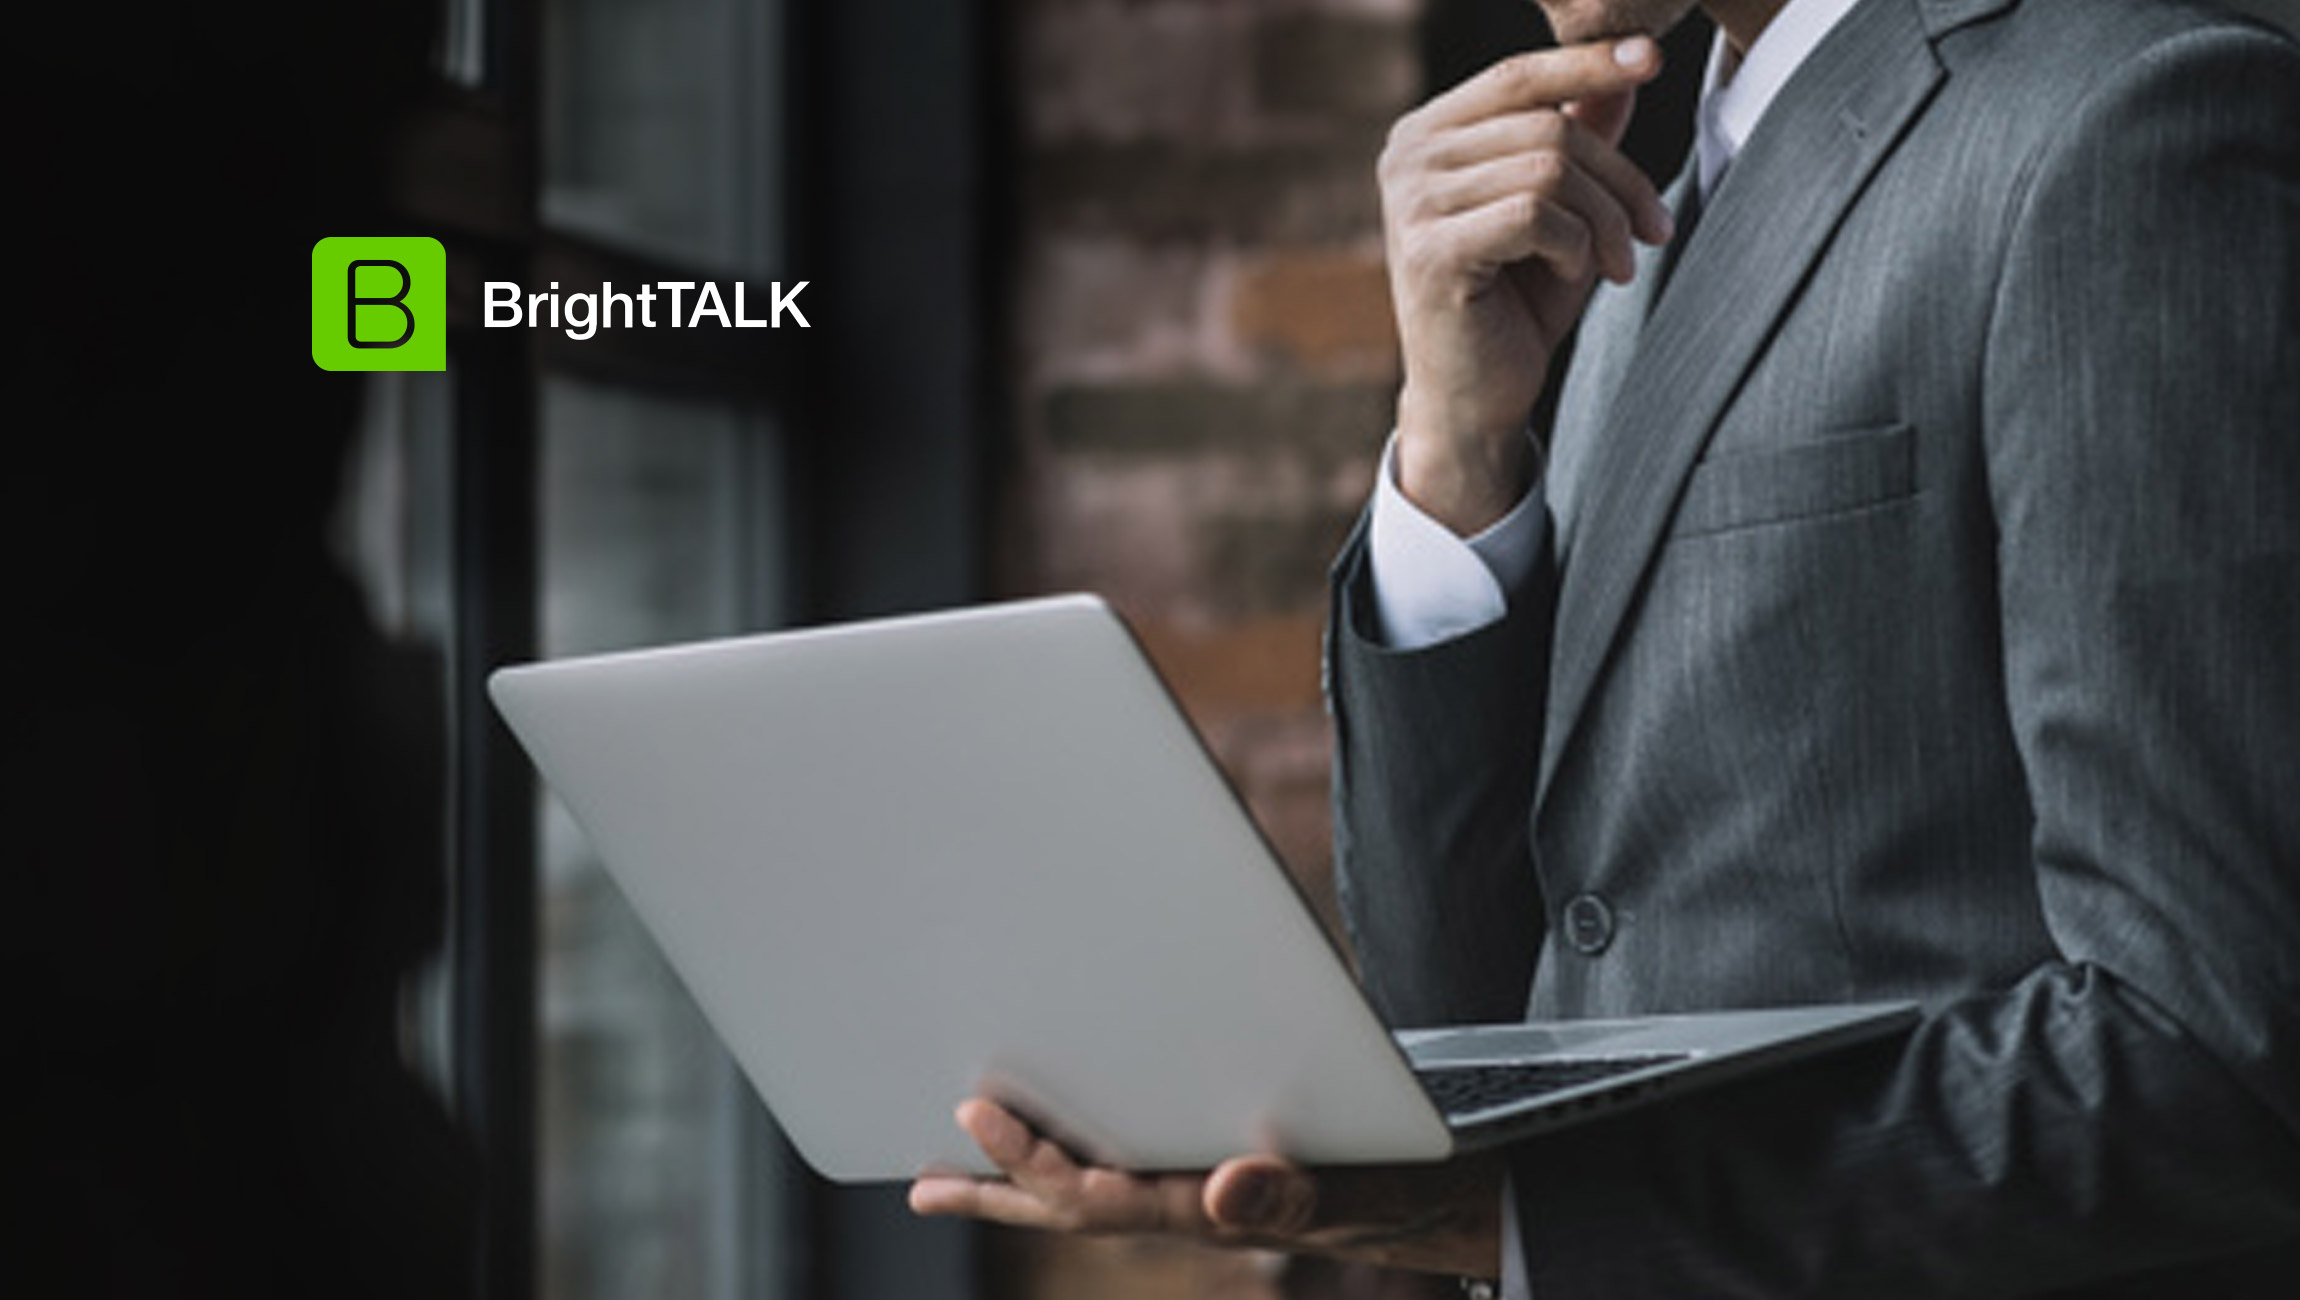 BrightTALK Introduces New Insights Feature to Help B2B Marketers Analyze Prospects’ Buying Intent